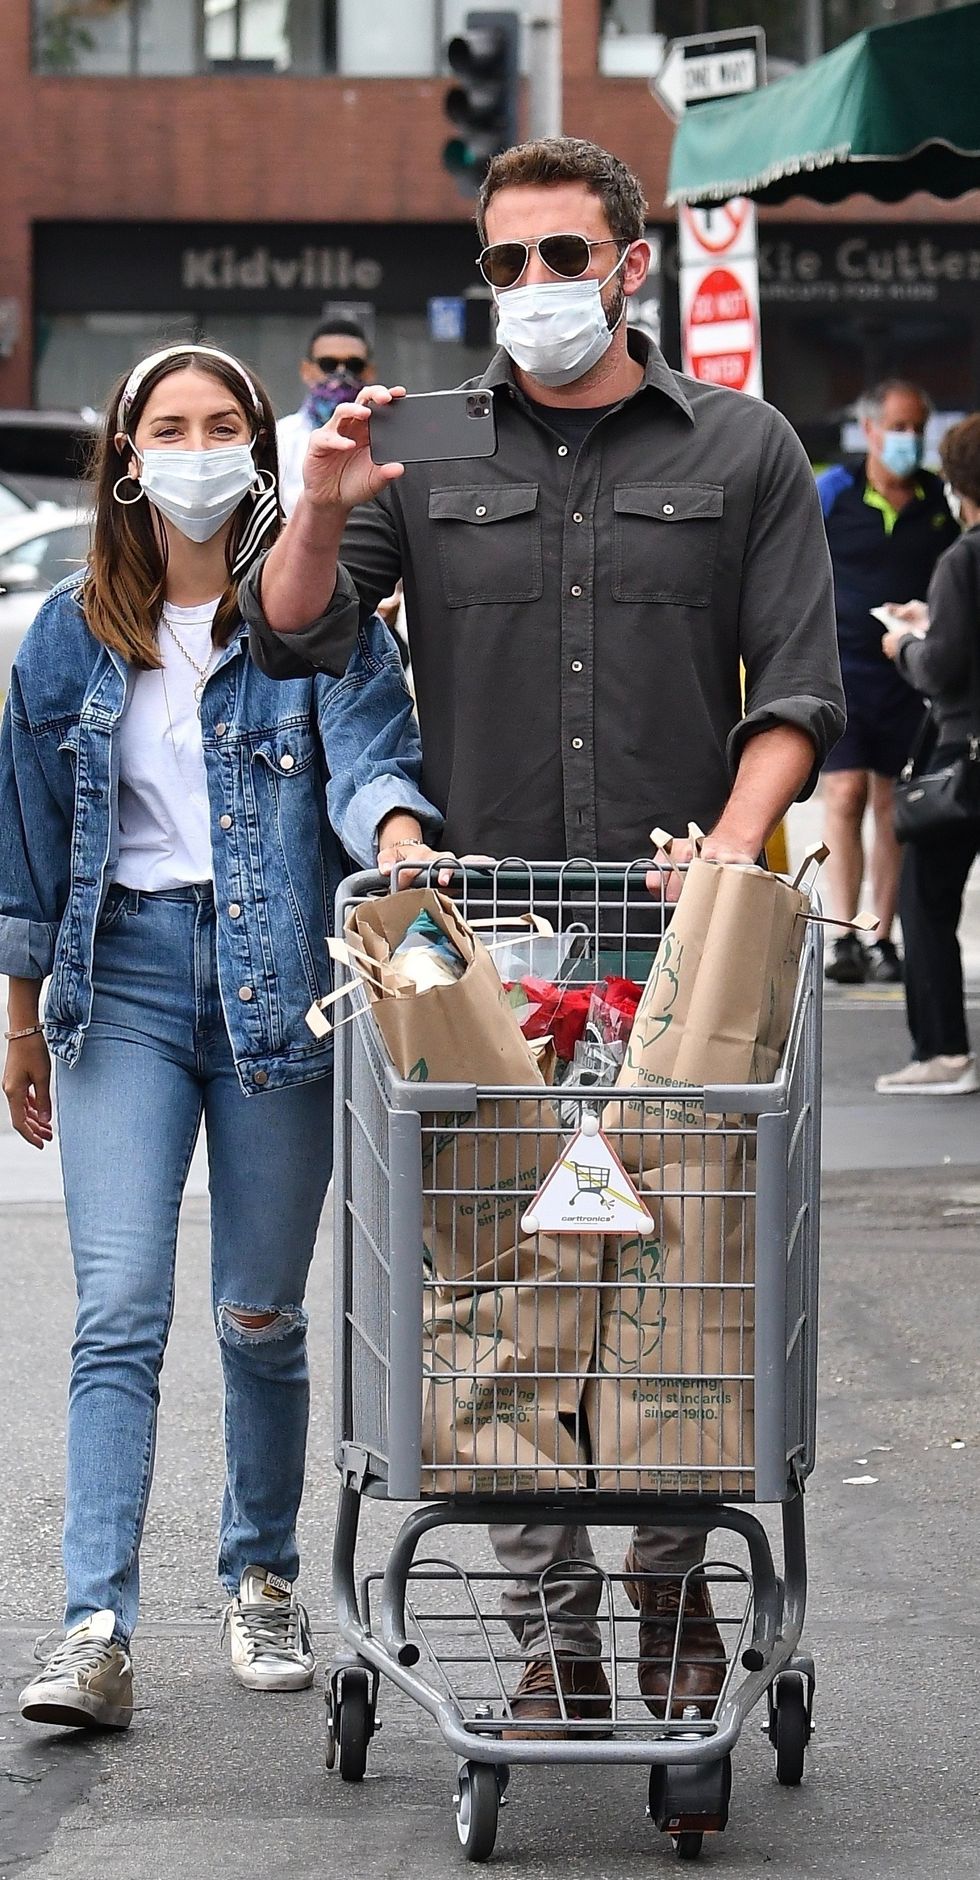 brentwood, ca    ben affleck and girlfriend ana de armas spends some time with his daughter violet and shop at whole foods to get groceries for the upcoming weekendpictured ben affleck, ana de armas, violet affleckbackgrid usa 5 june 2020 byline must read boaz  backgridusa 1 310 798 9111  usasalesbackgridcomuk 44 208 344 2007  uksalesbackgridcomuk clients   pictures containing childrenplease pixelate face prior to publication